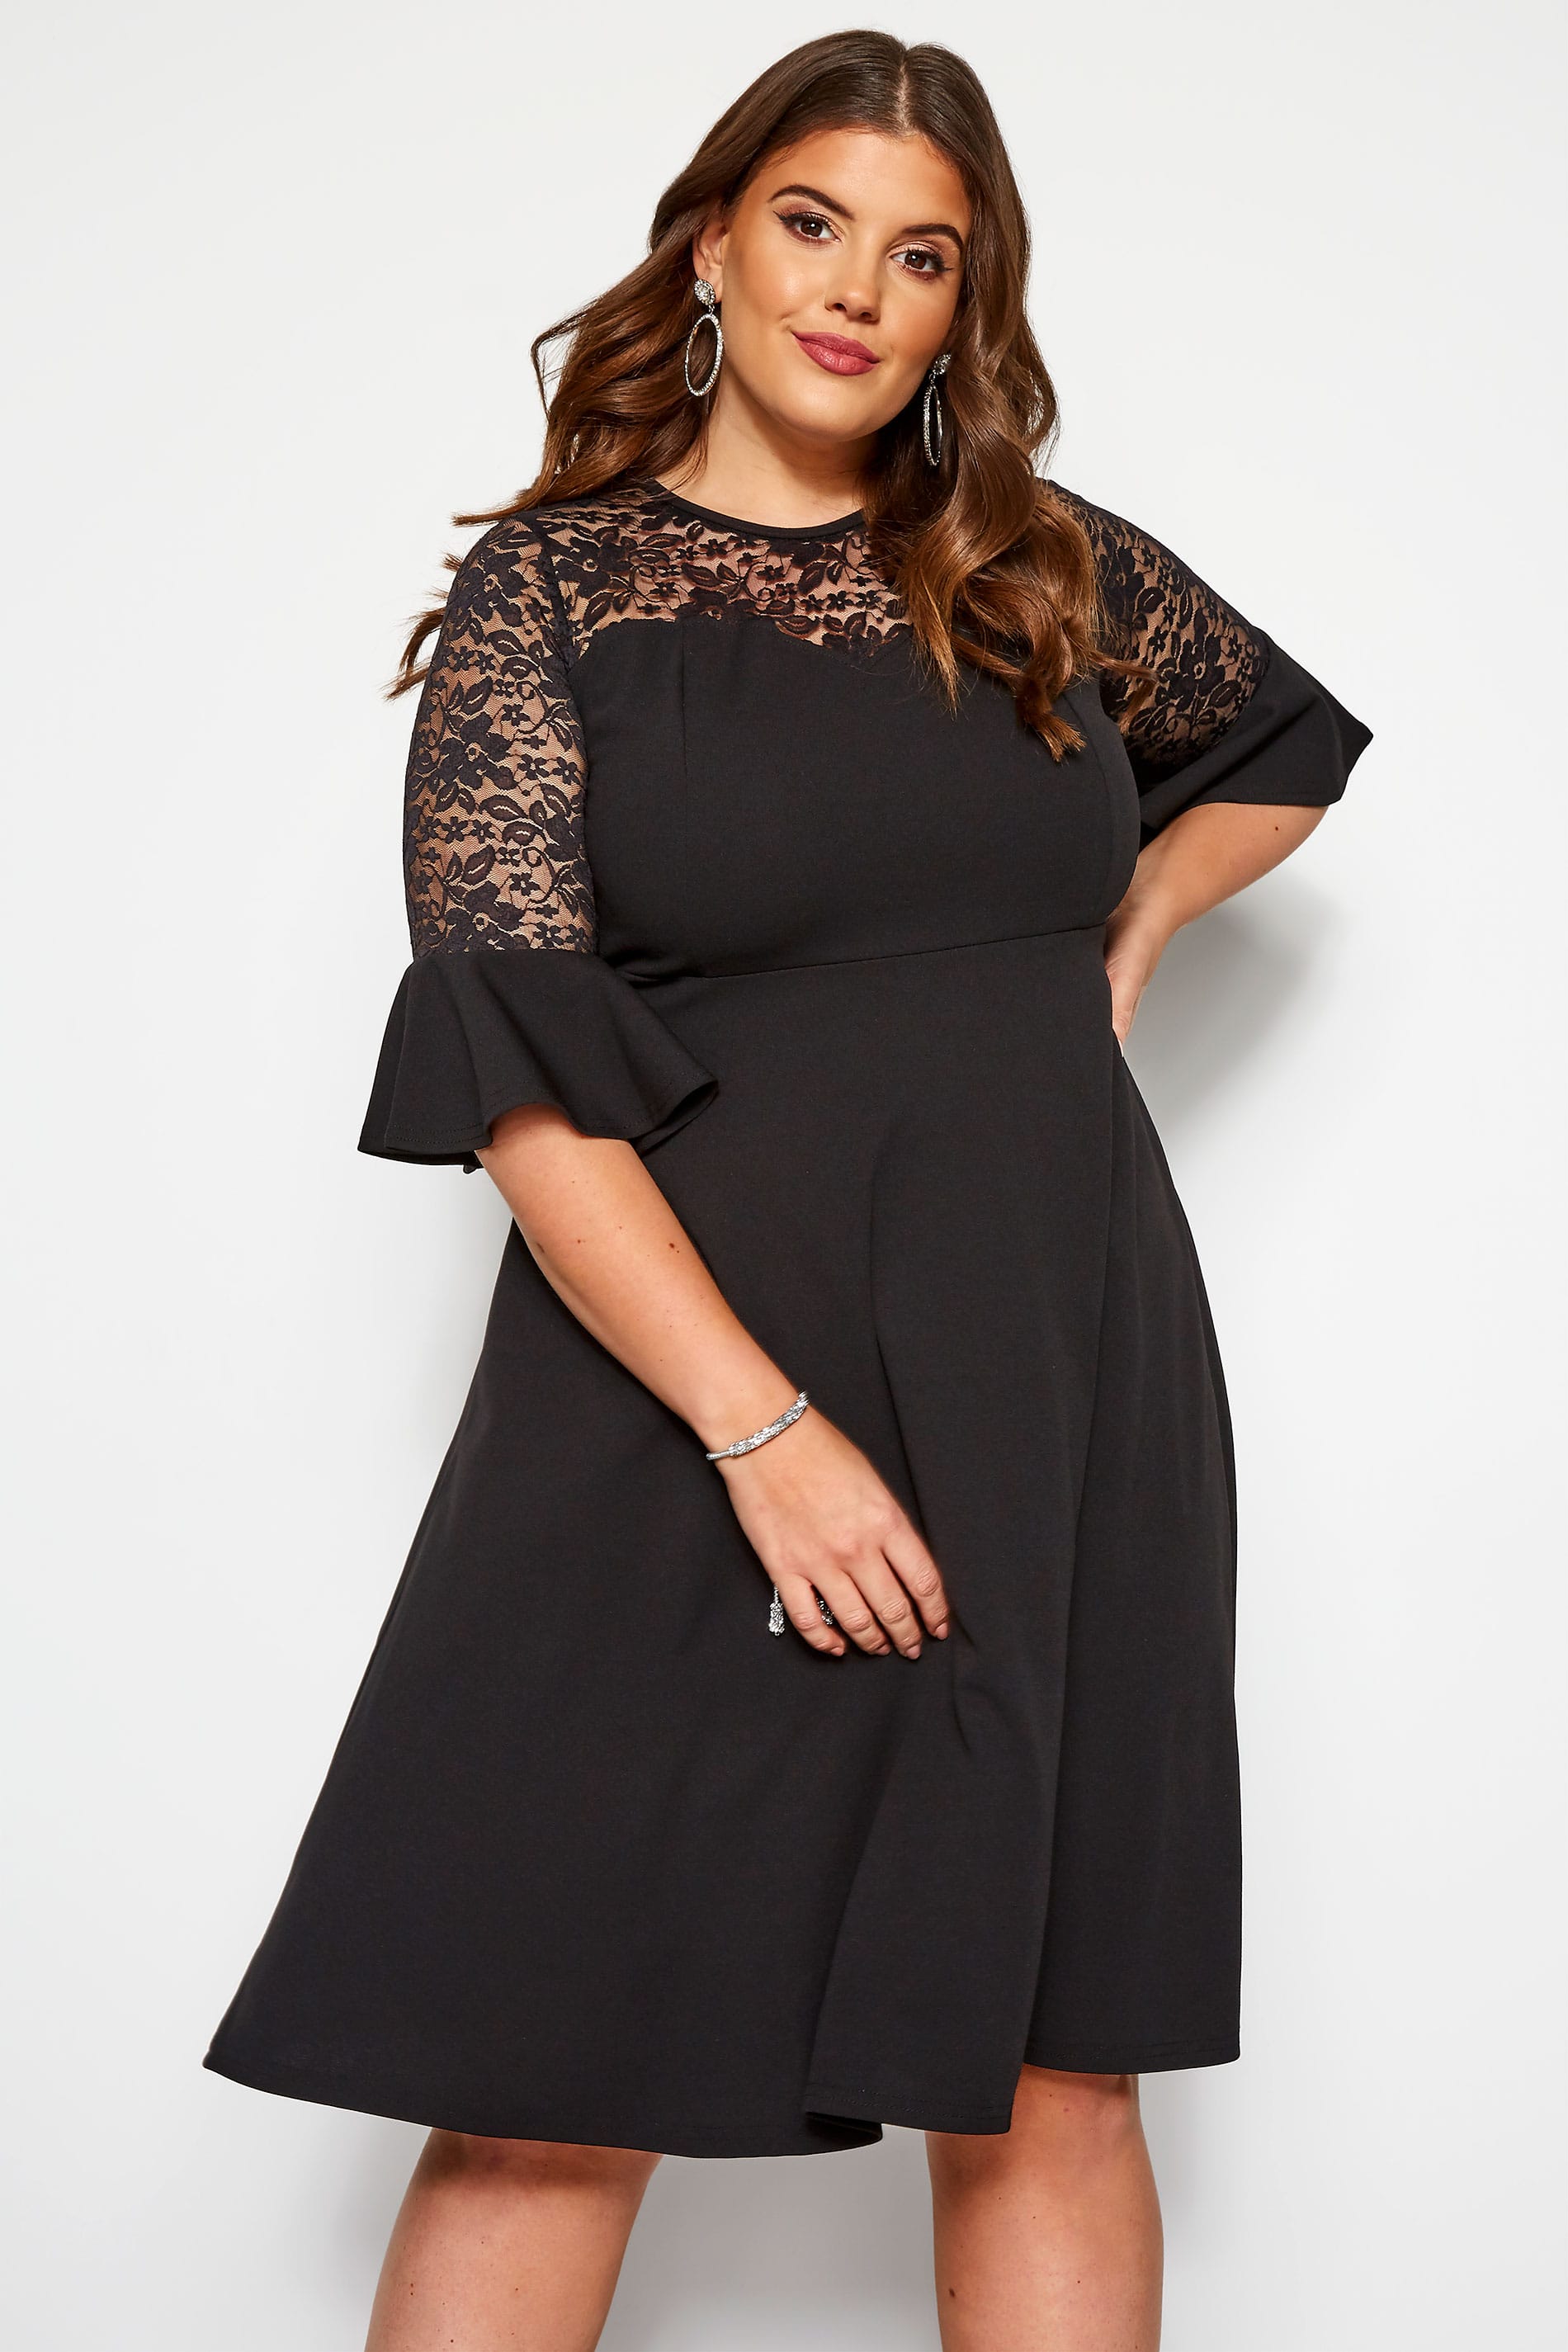 perfect evening lace skater dress